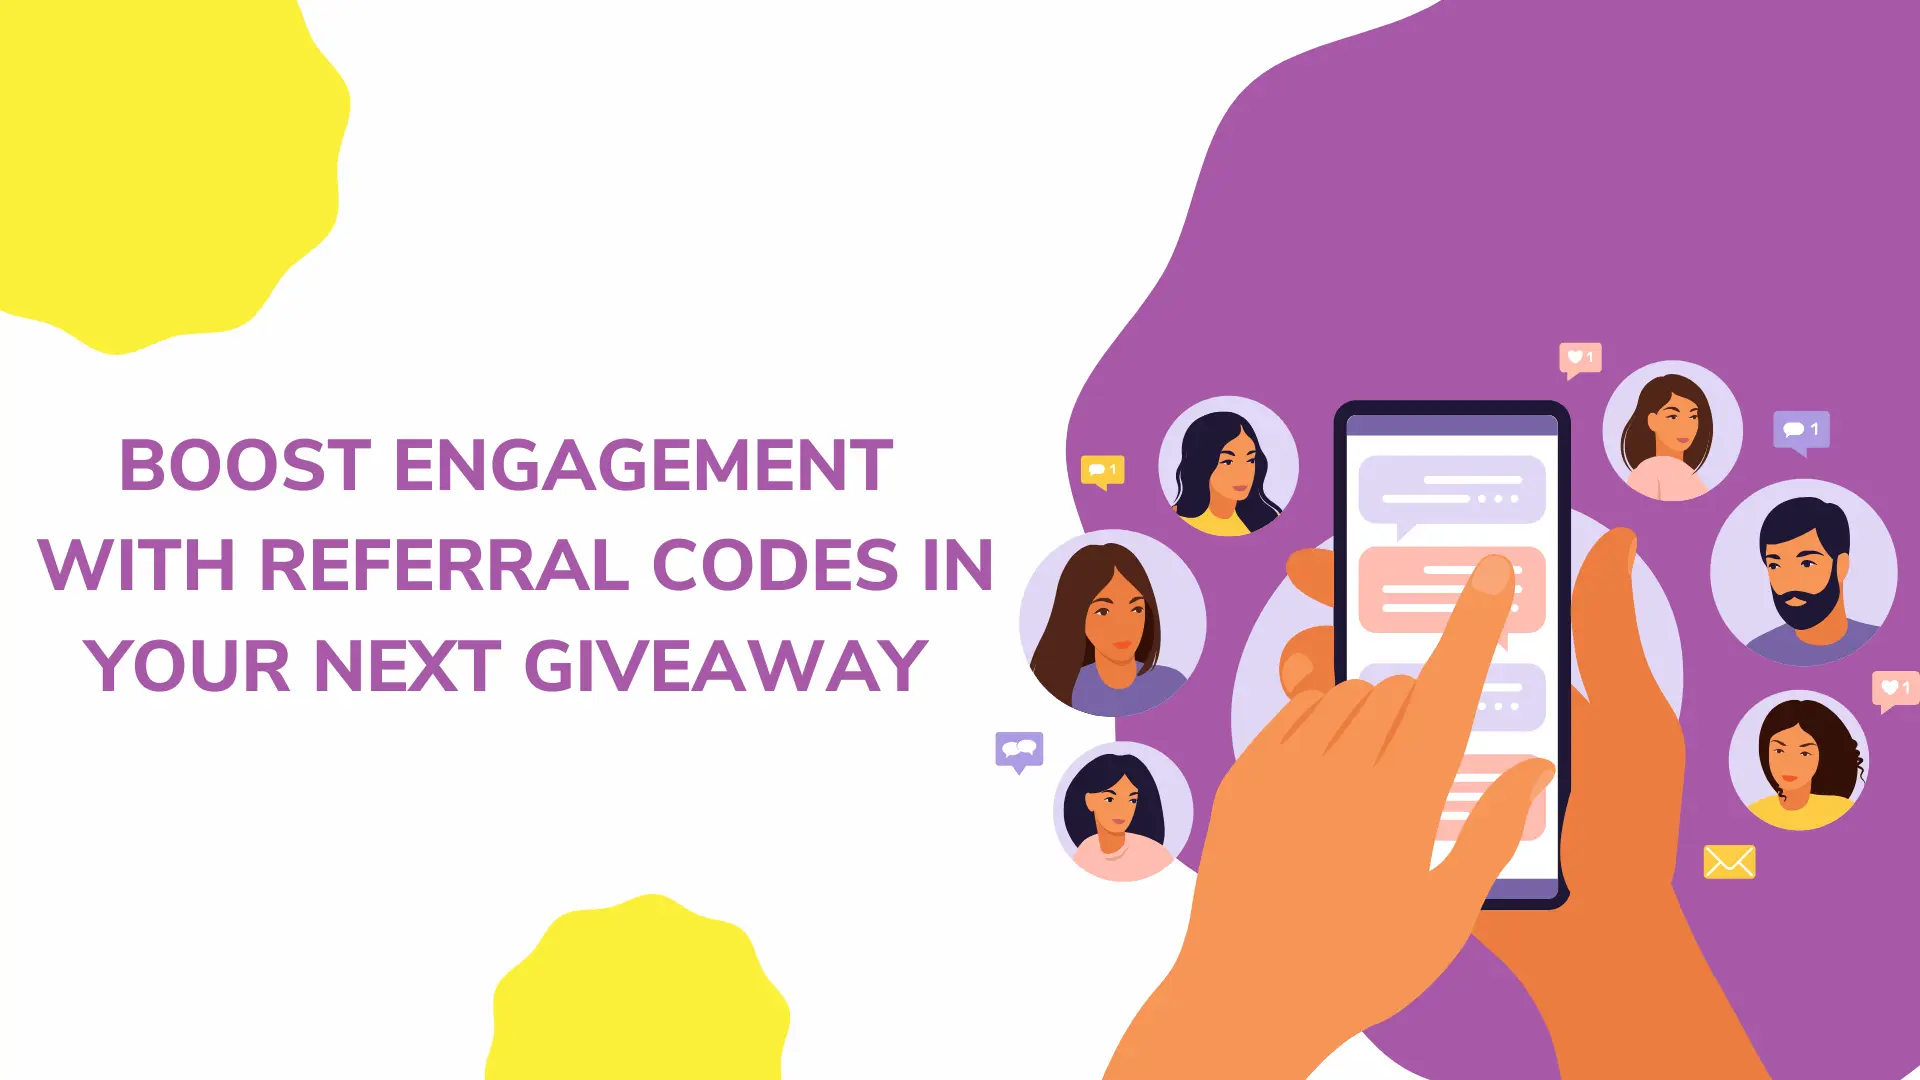 Boost Engagement With Referral Codes in Your Next Giveaway